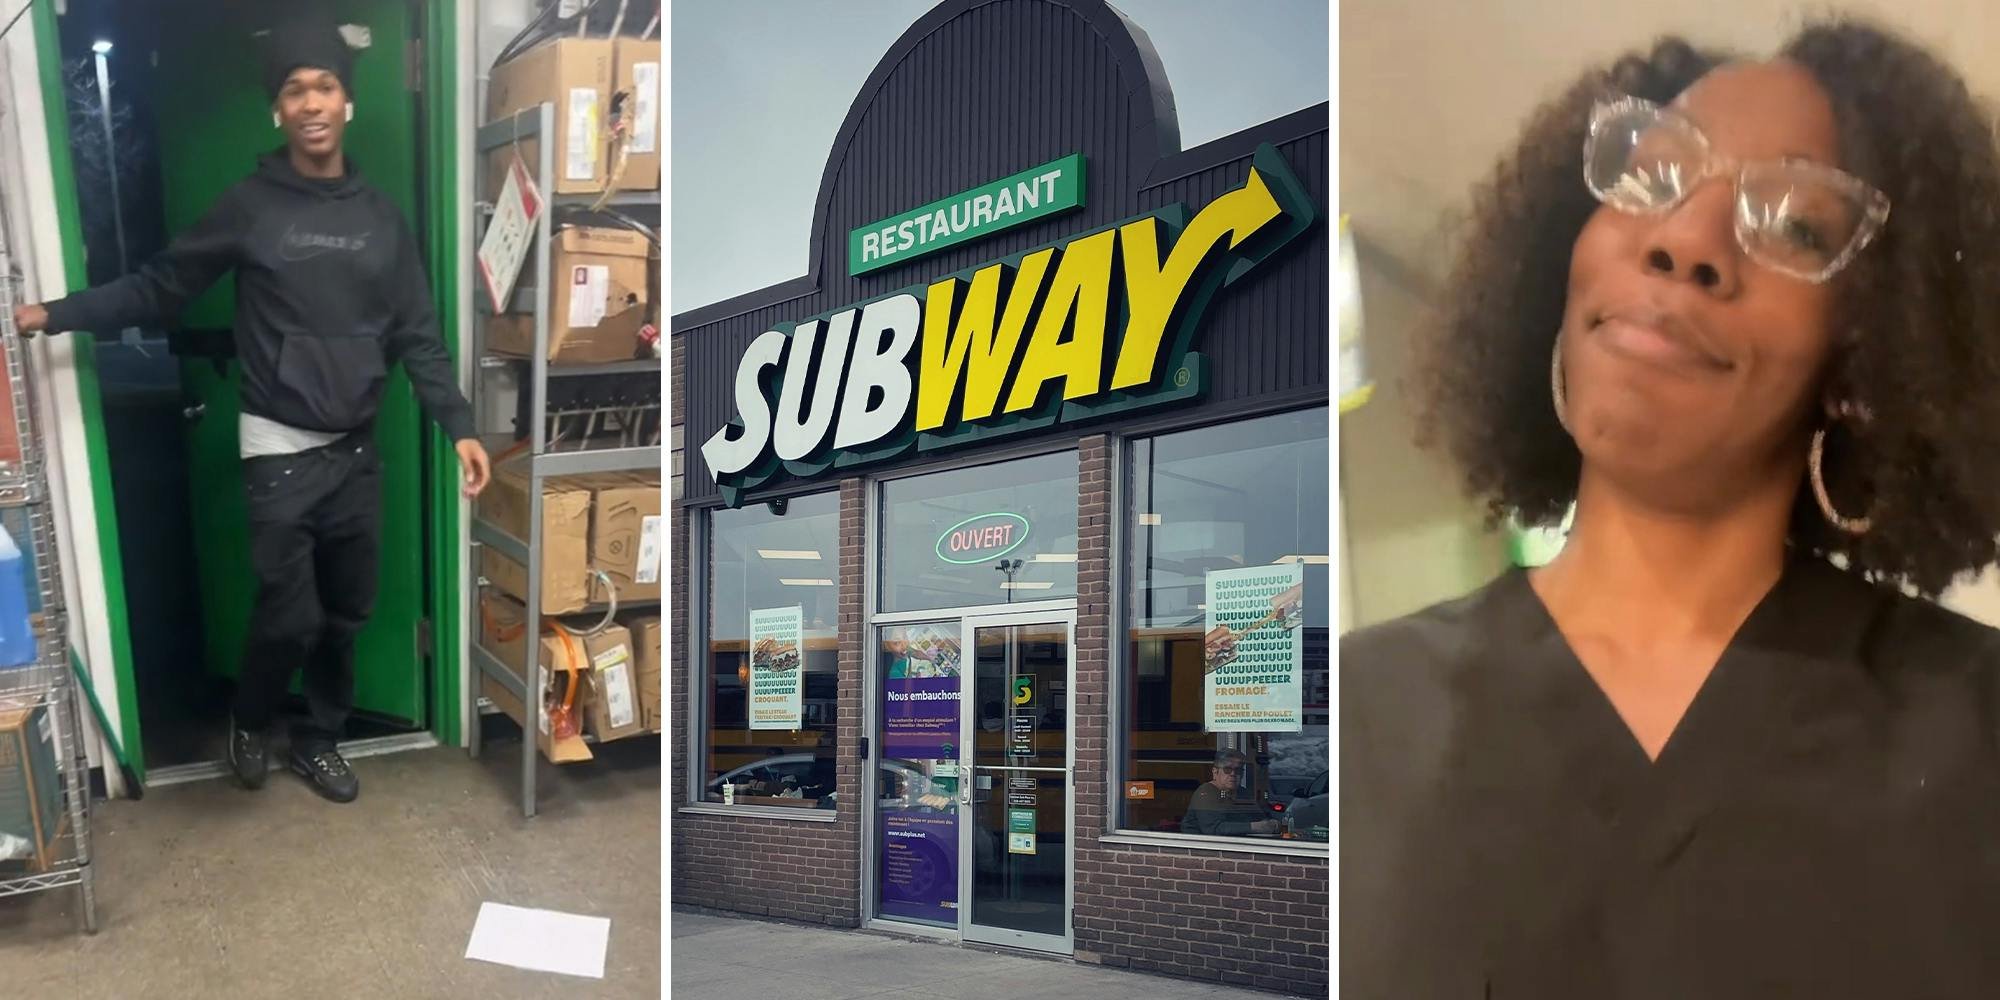 ‘How you going to go on break when you're the only person?’: Subway customer goes to back of store, interrupts lone worker on their ‘break’